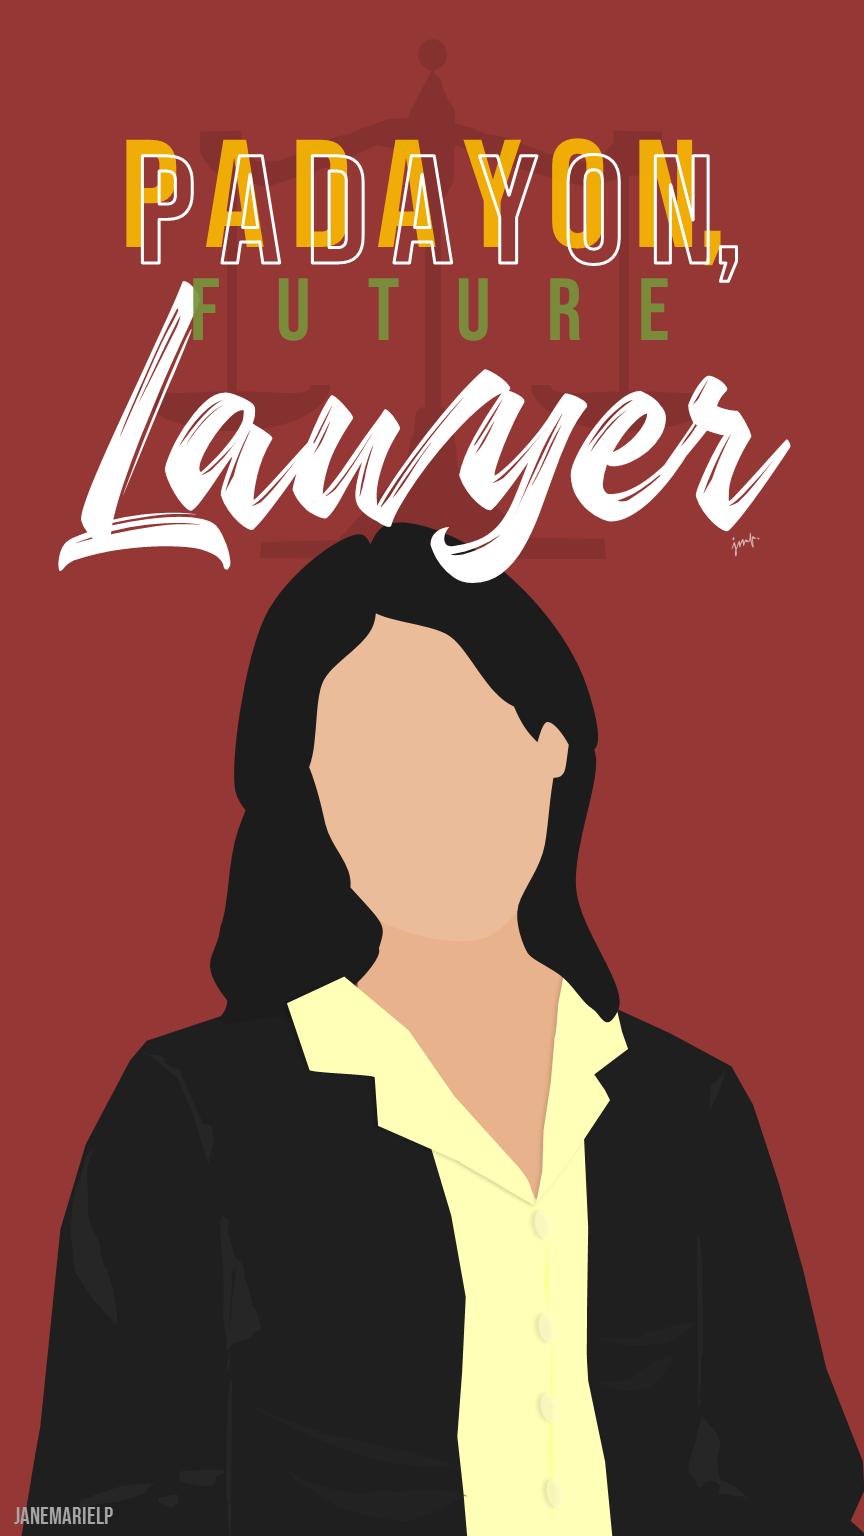 Jane ✨ Phone Wallpaper (Lawyer Attorney) I Don't Even Know When The Bar Exam Is But This Is So Requested. I Know A Lot Of You Guys Aspire To Be